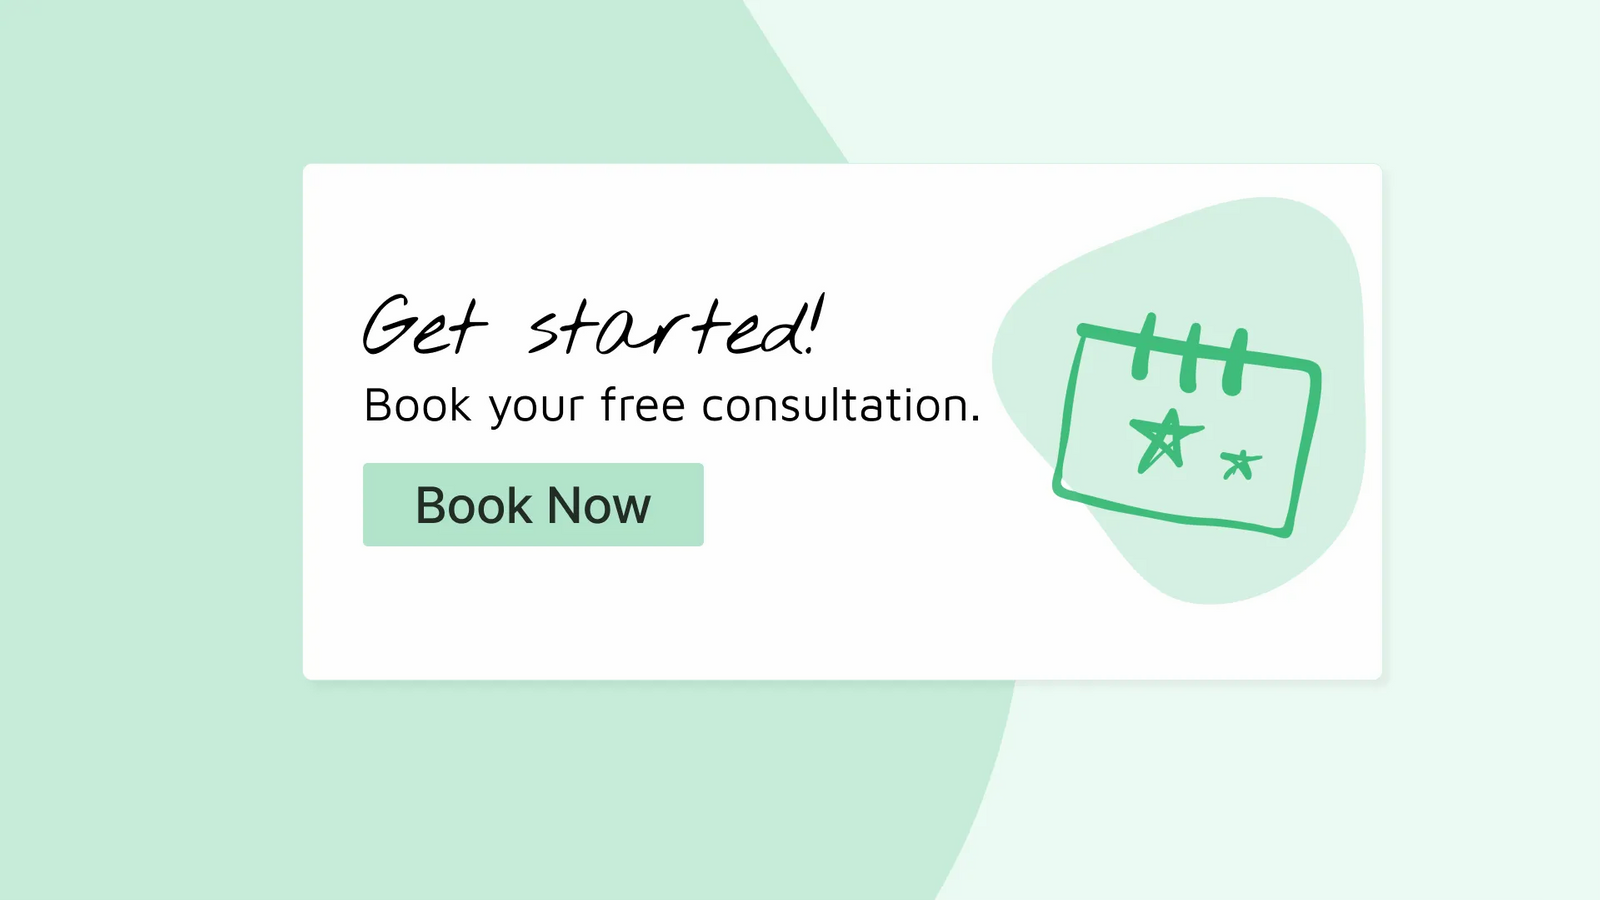 book a consultation button close up example for small busines website